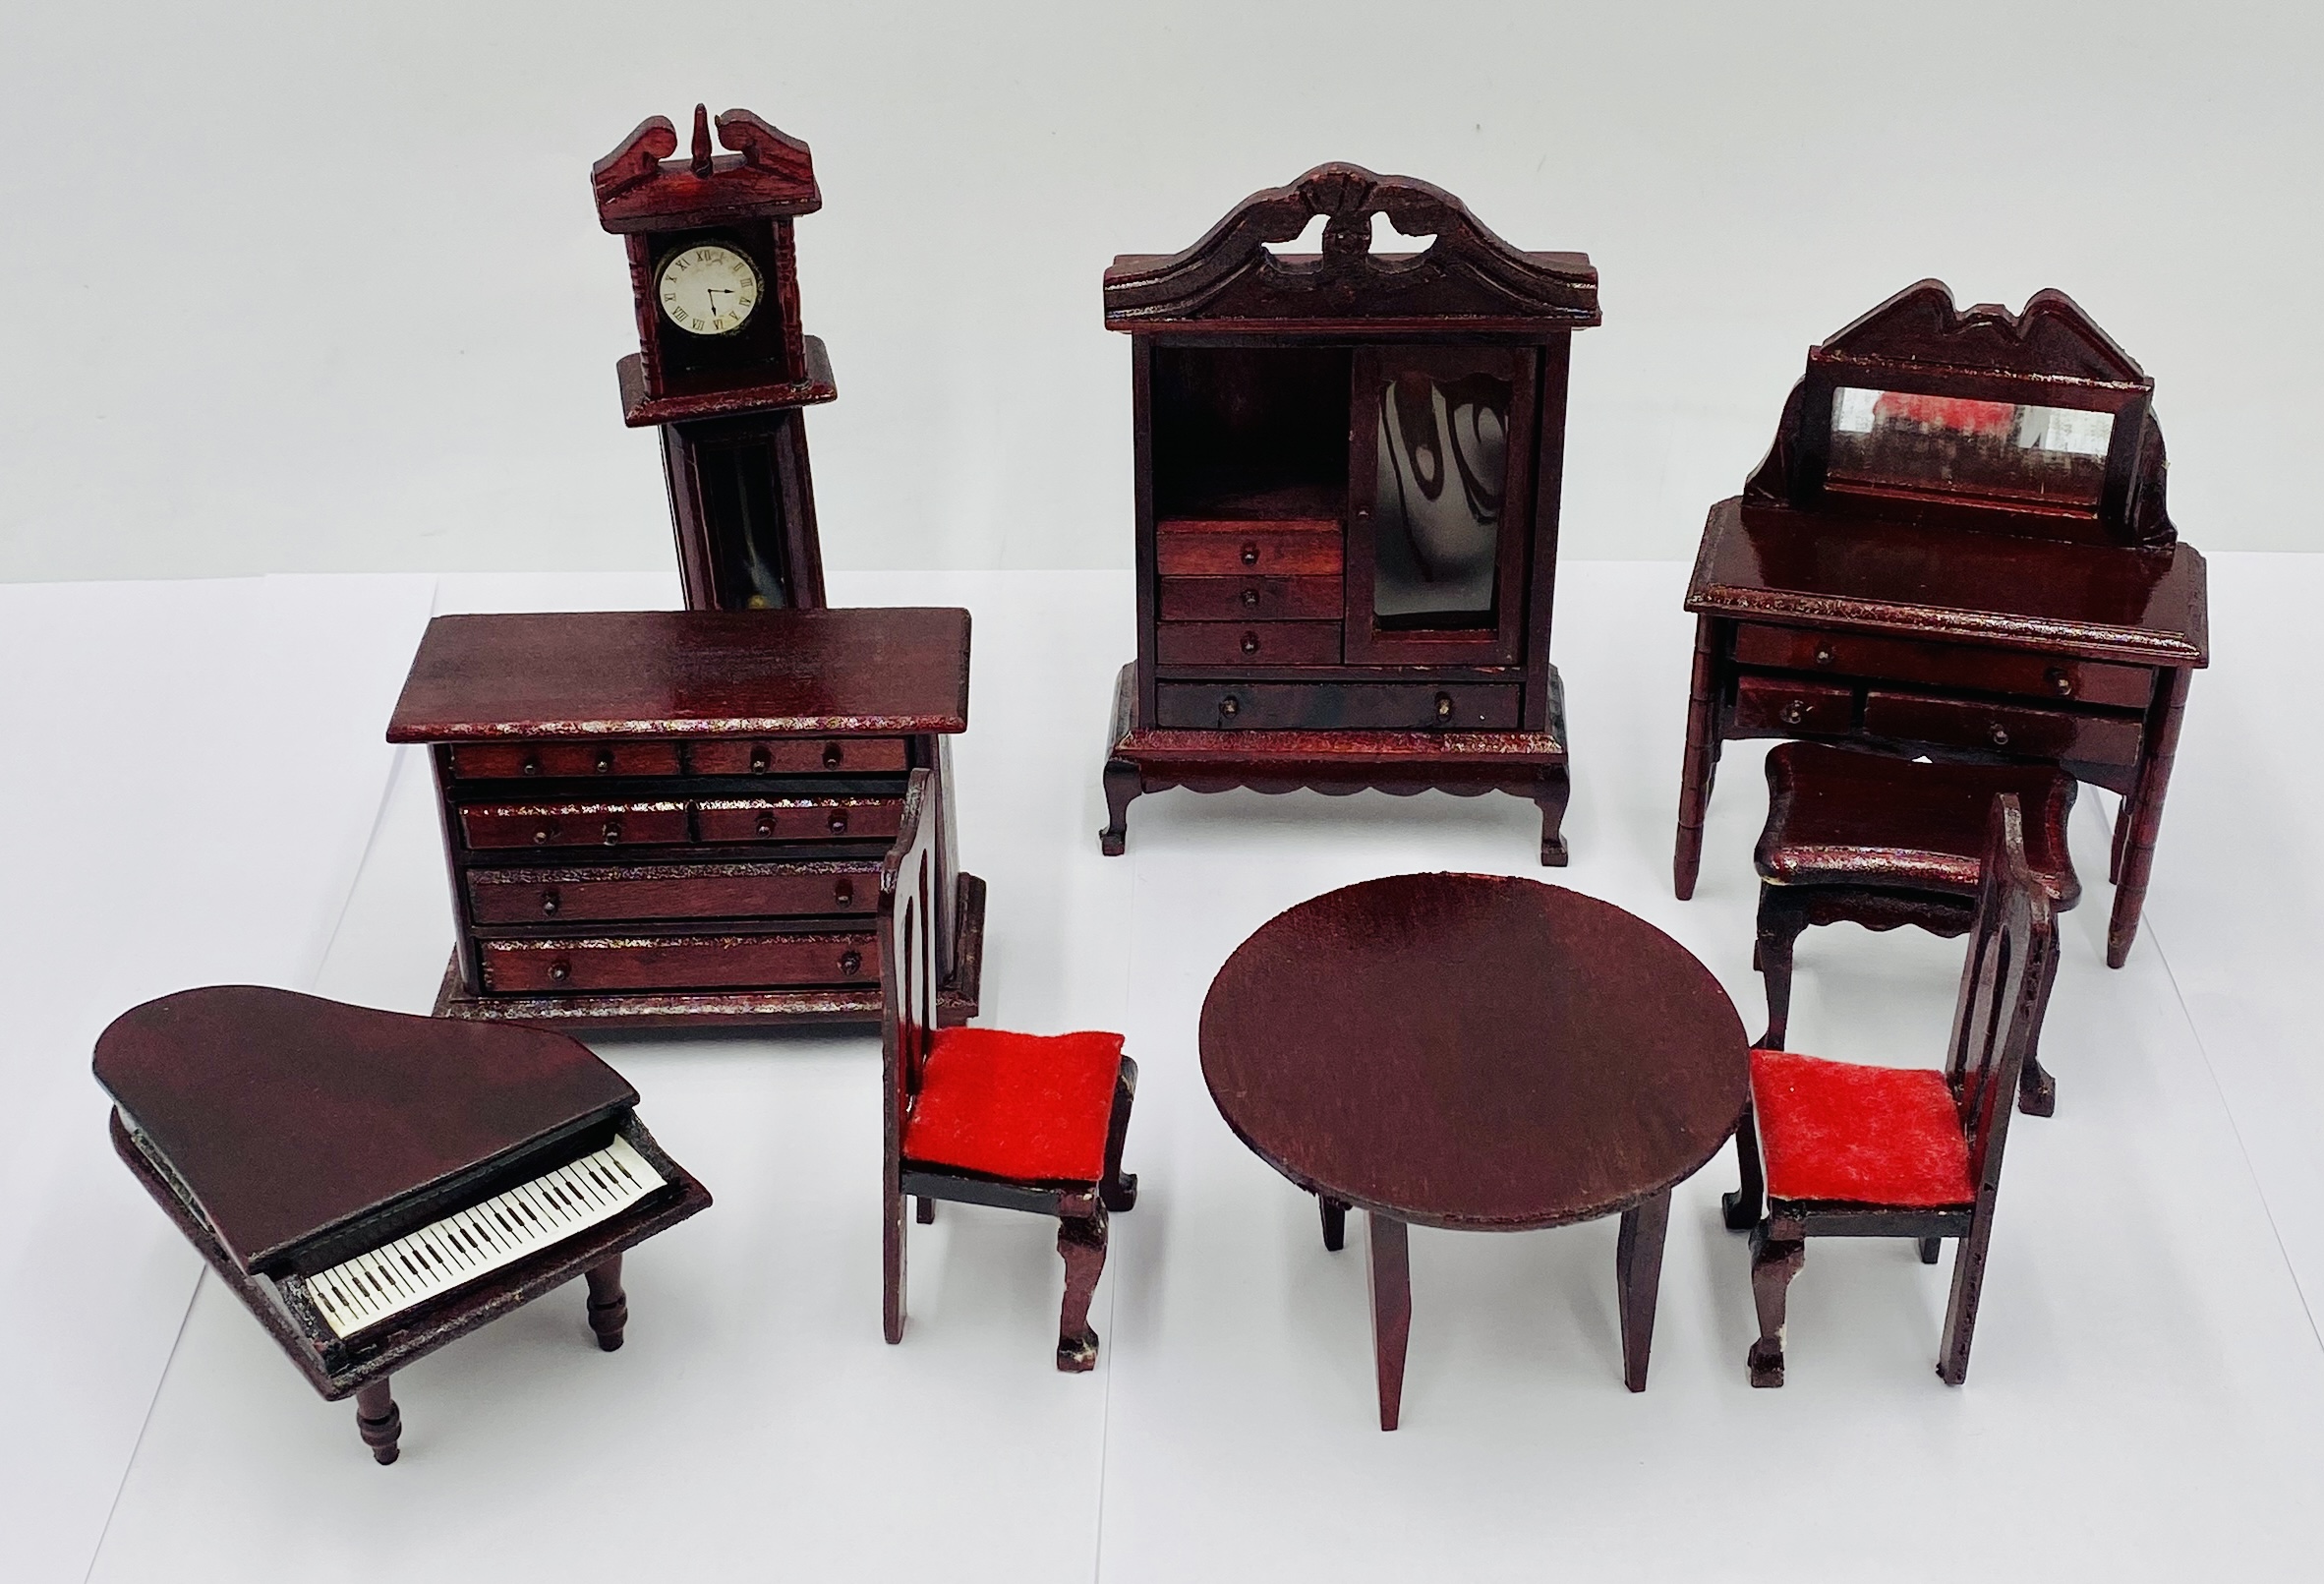 A collection of dolls house furniture including a floral three-piece suite, dining table and chairs, - Image 6 of 6